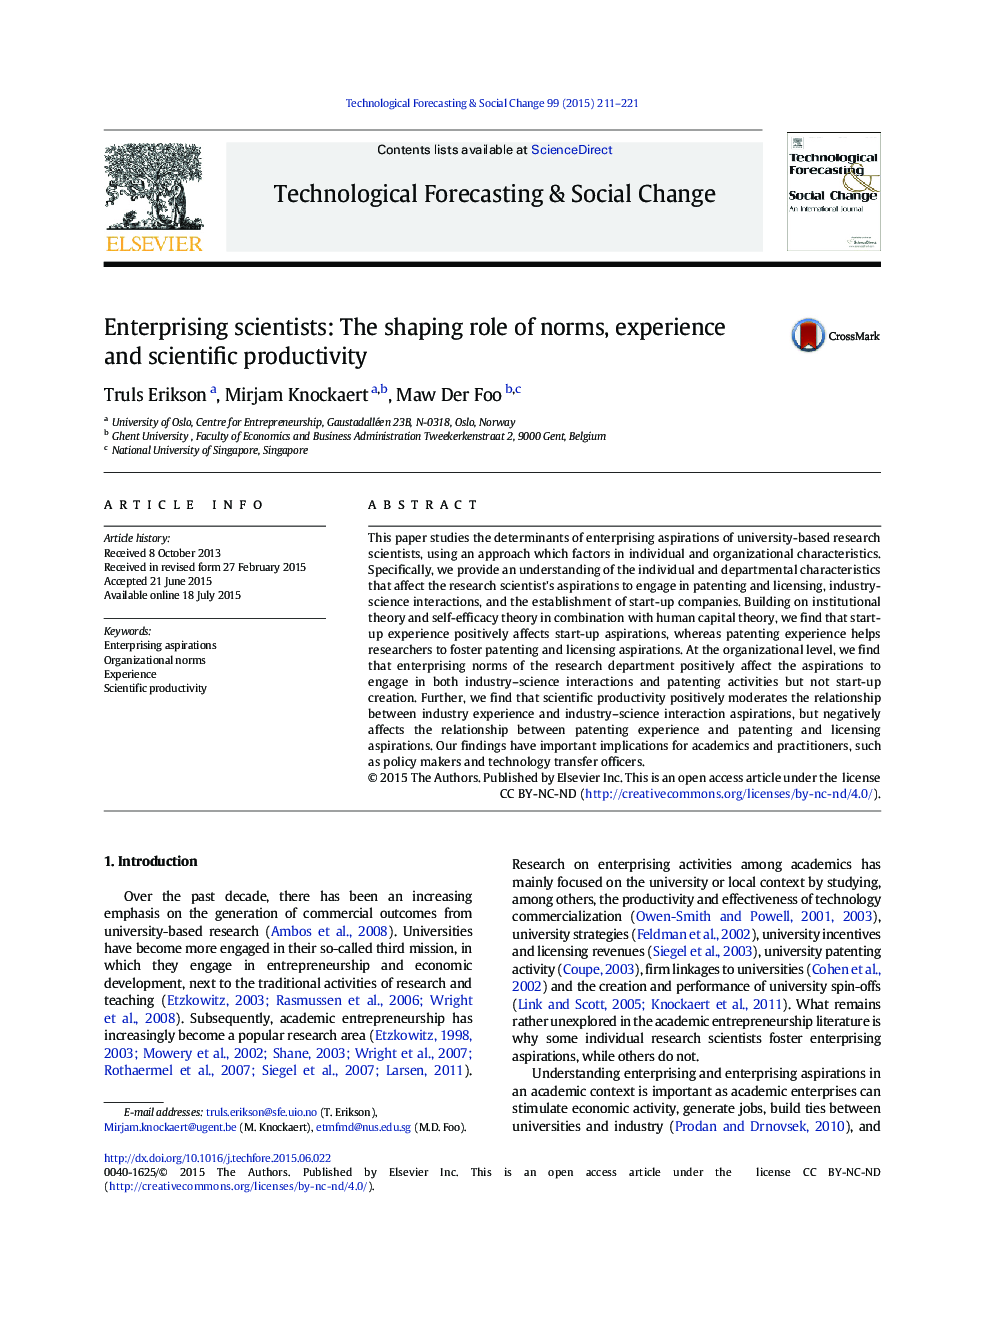 Enterprising scientists: The shaping role of norms, experience and scientific productivity